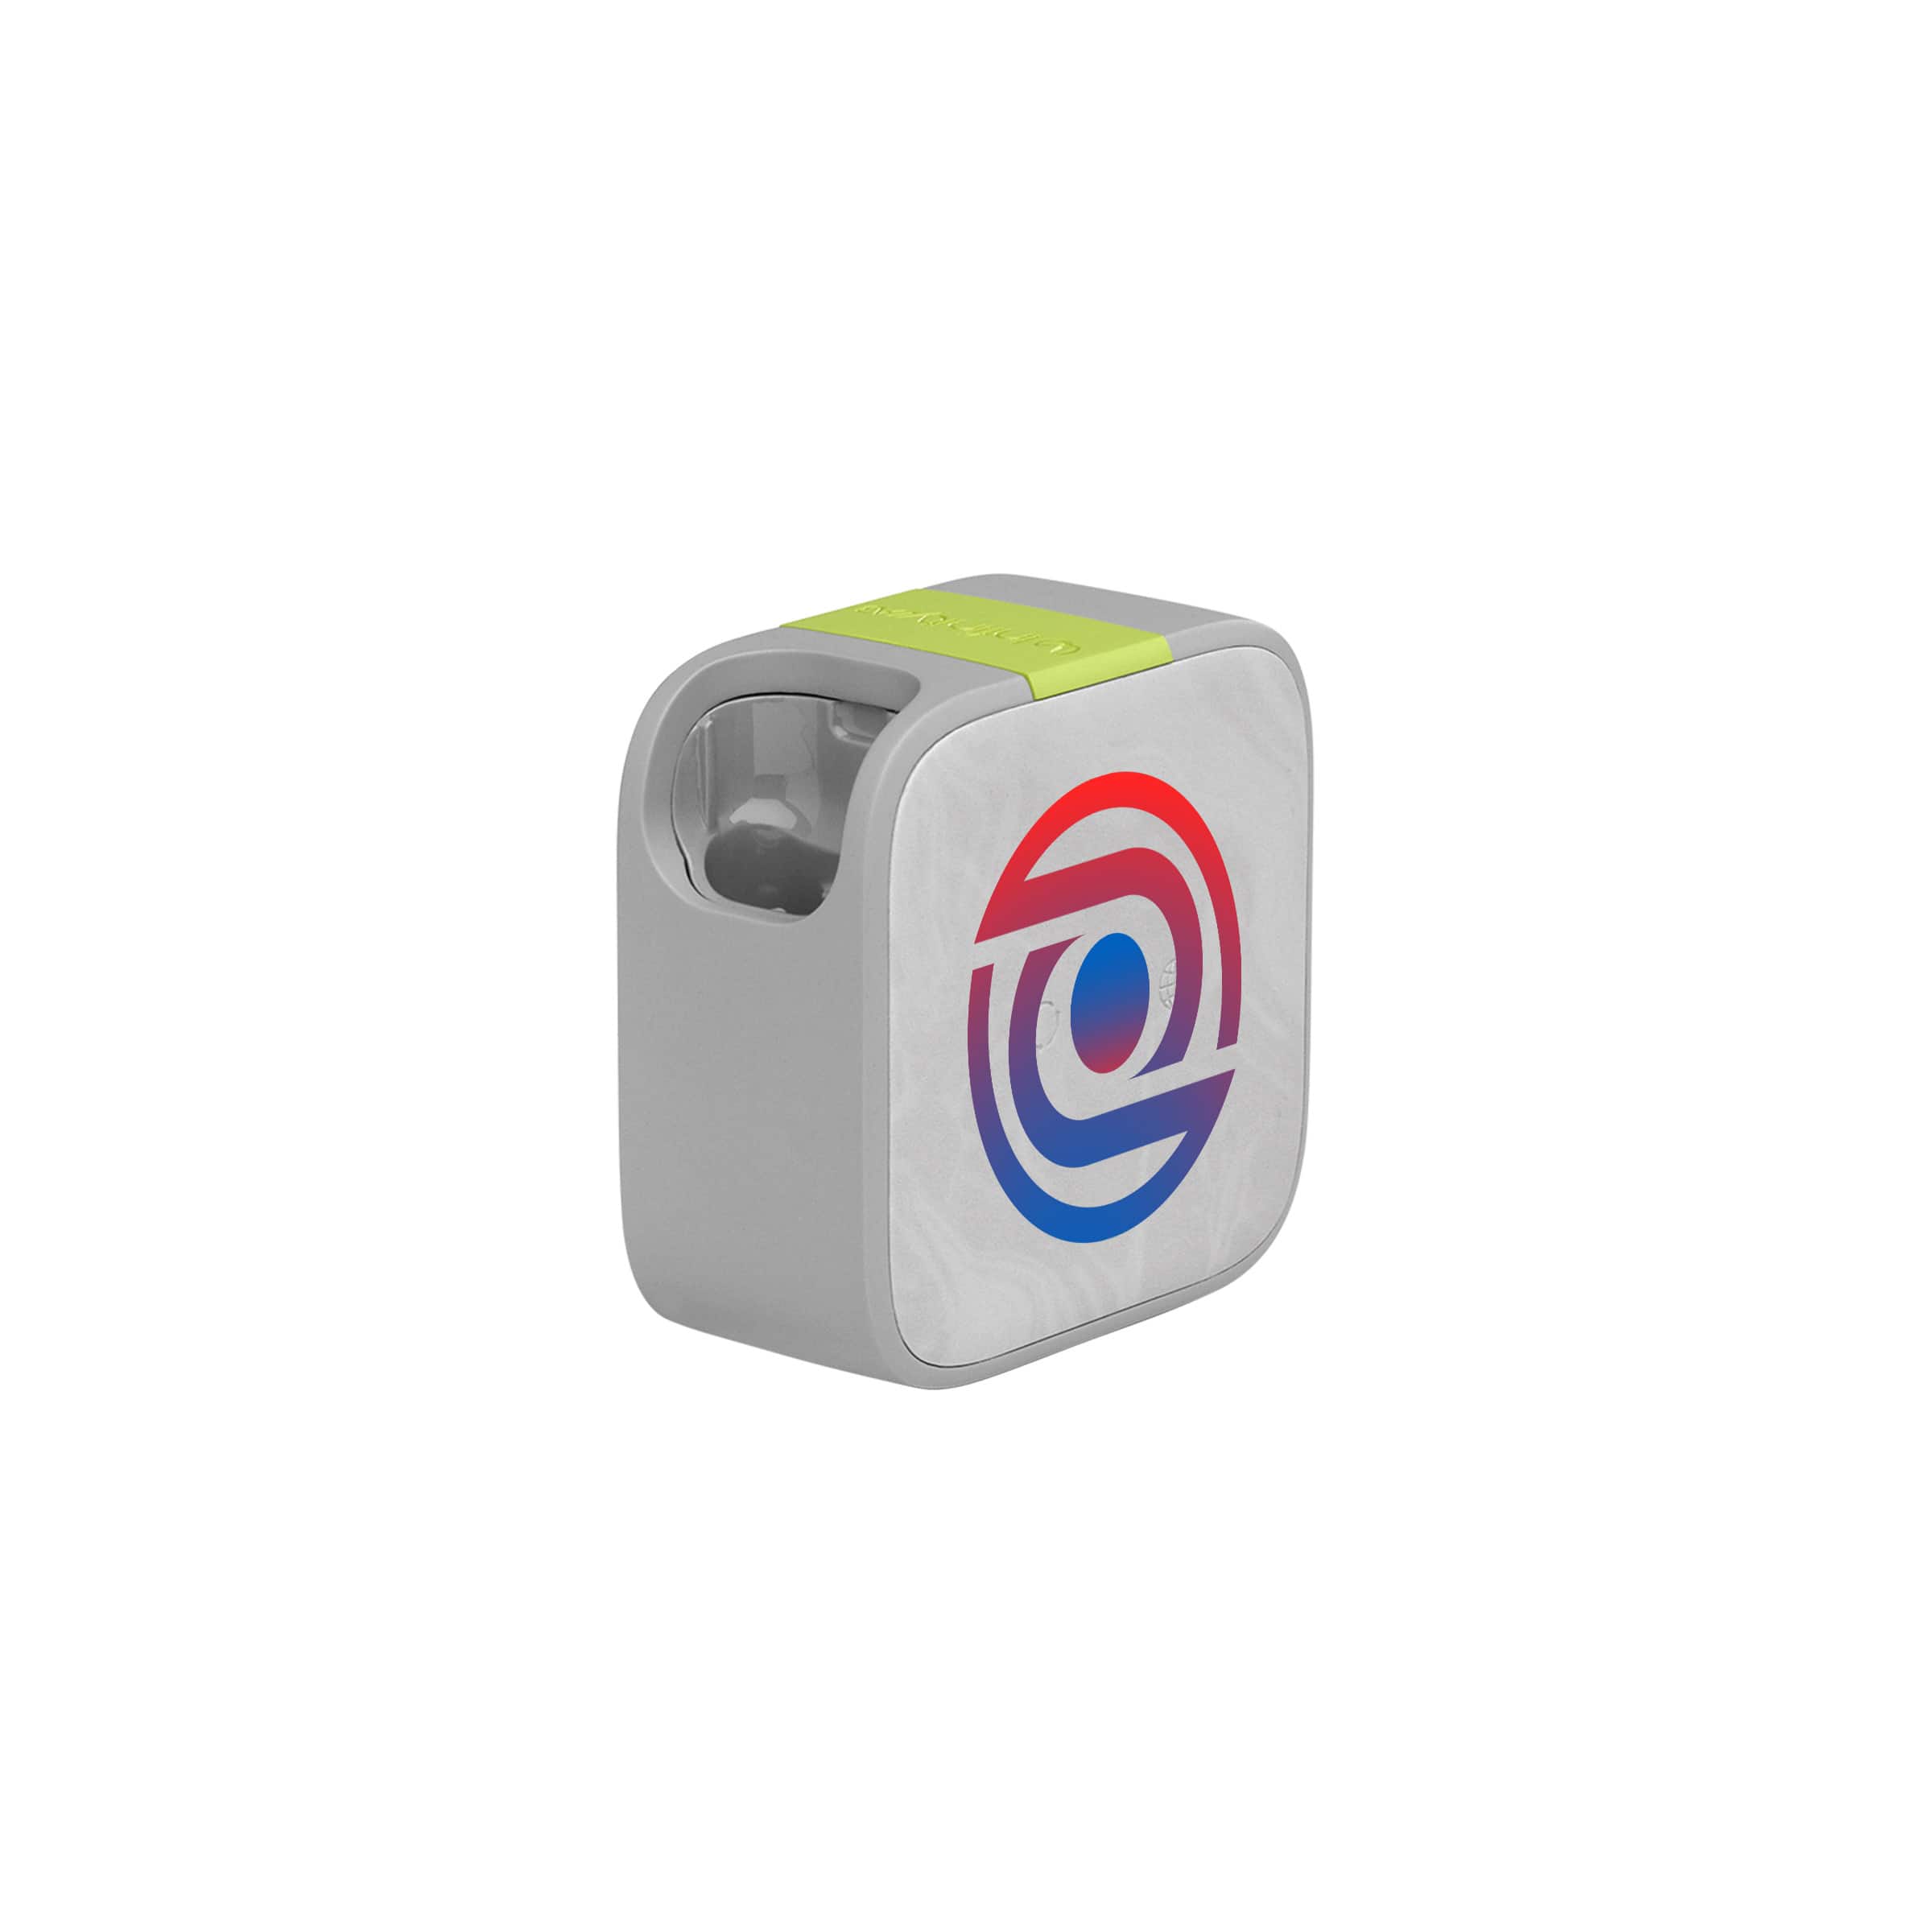 InfinityLab Instant Charger 65W 2USB - Personalisation with a full colour print and sleeve